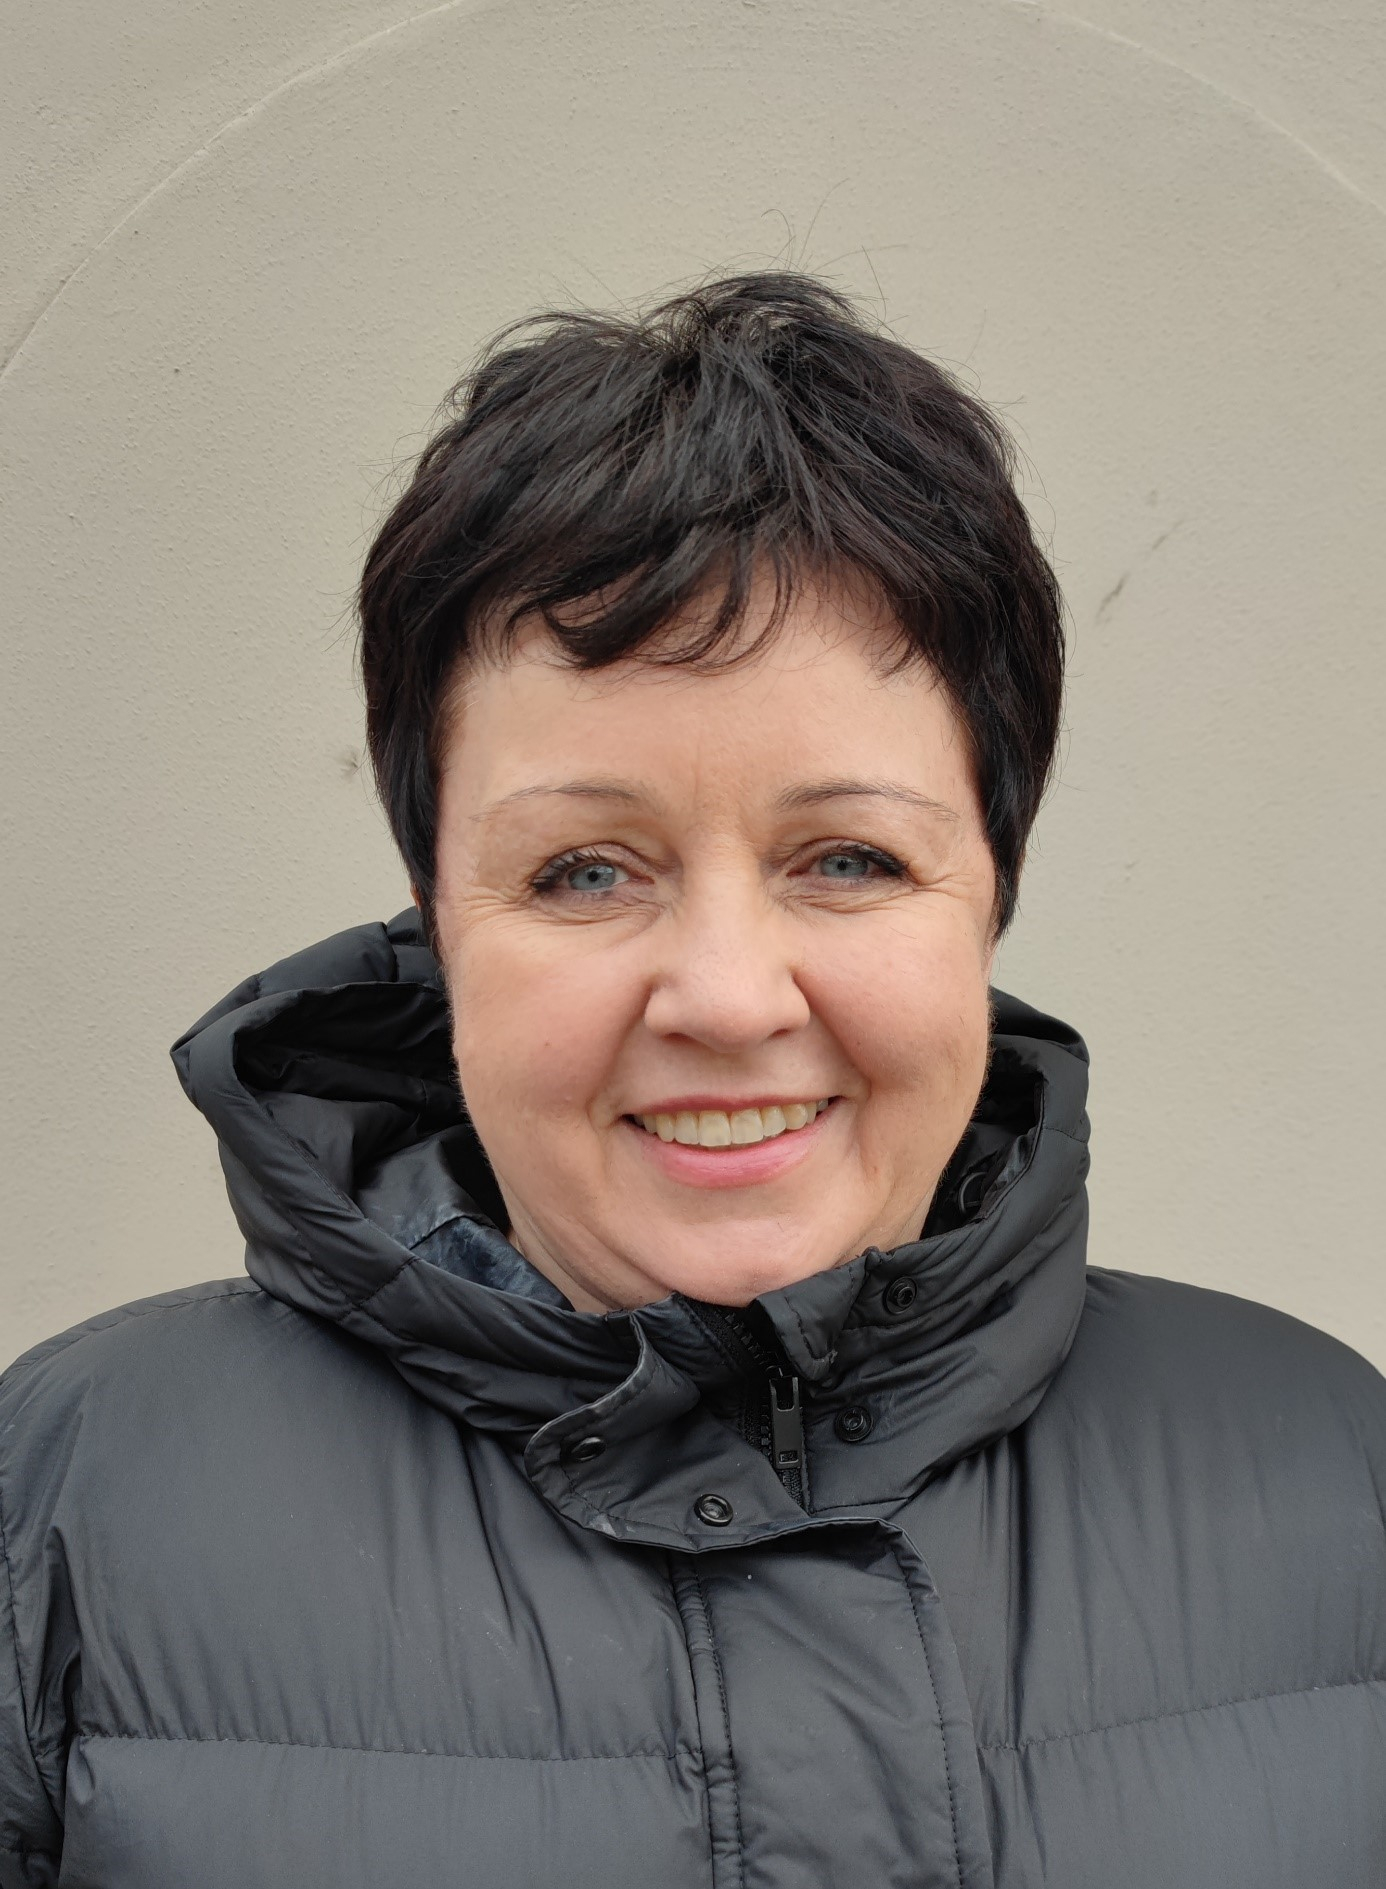 smiling woman with short, dark hair